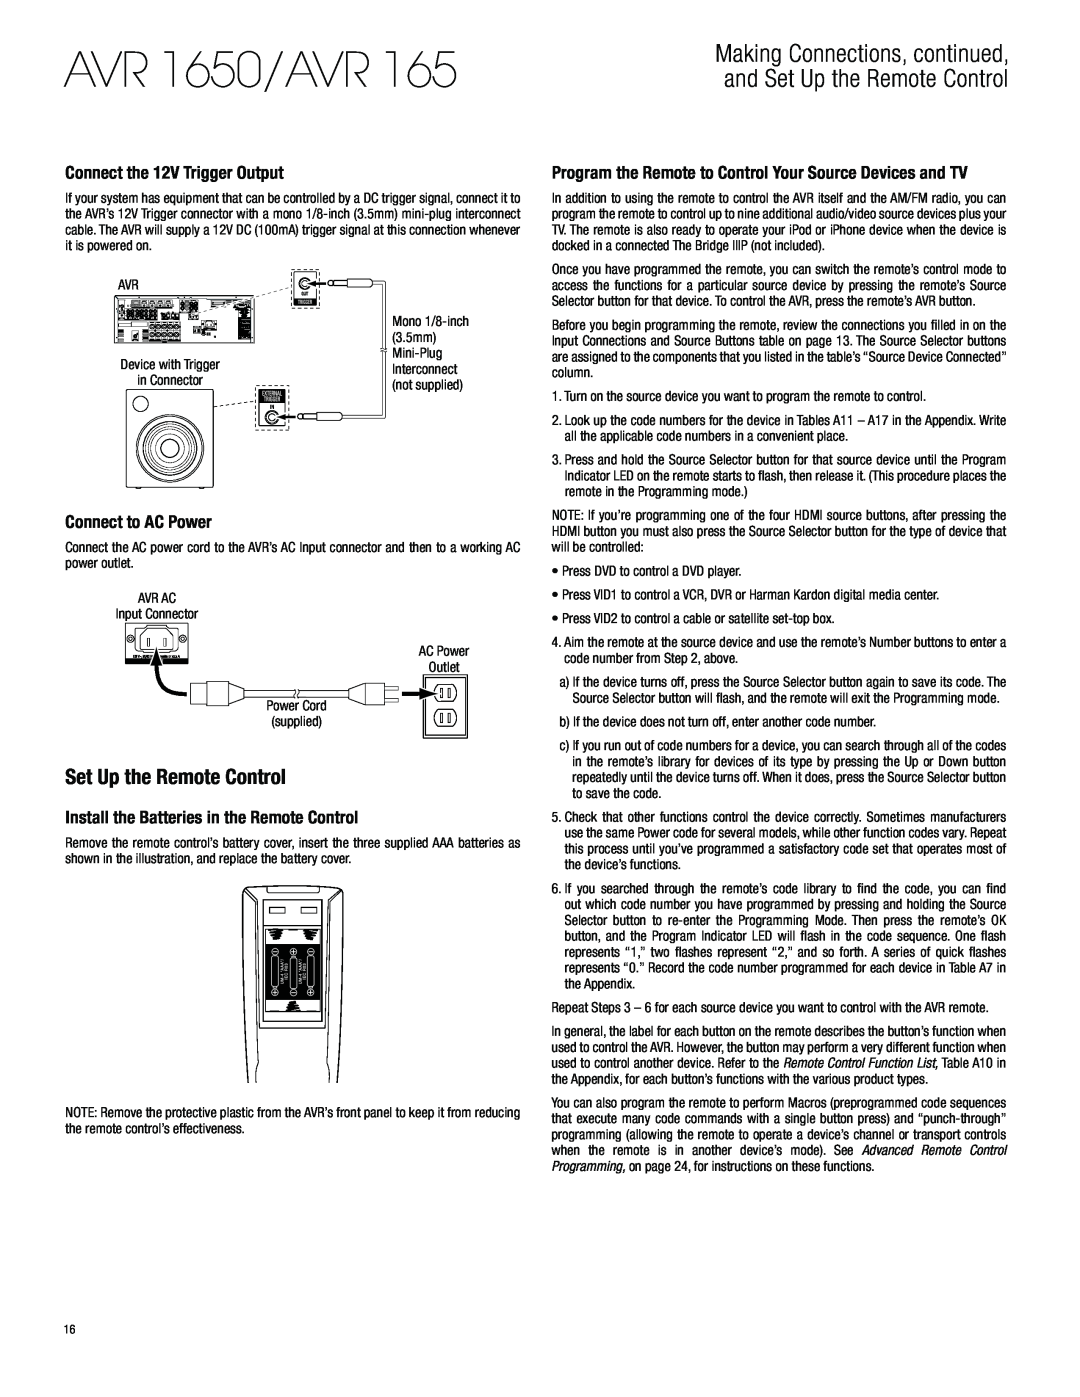 Harman-Kardon owner manual Set Up the Remote Control, Connect the 12V Trigger Output, Connect to AC Power, AVR 1650/AVR 